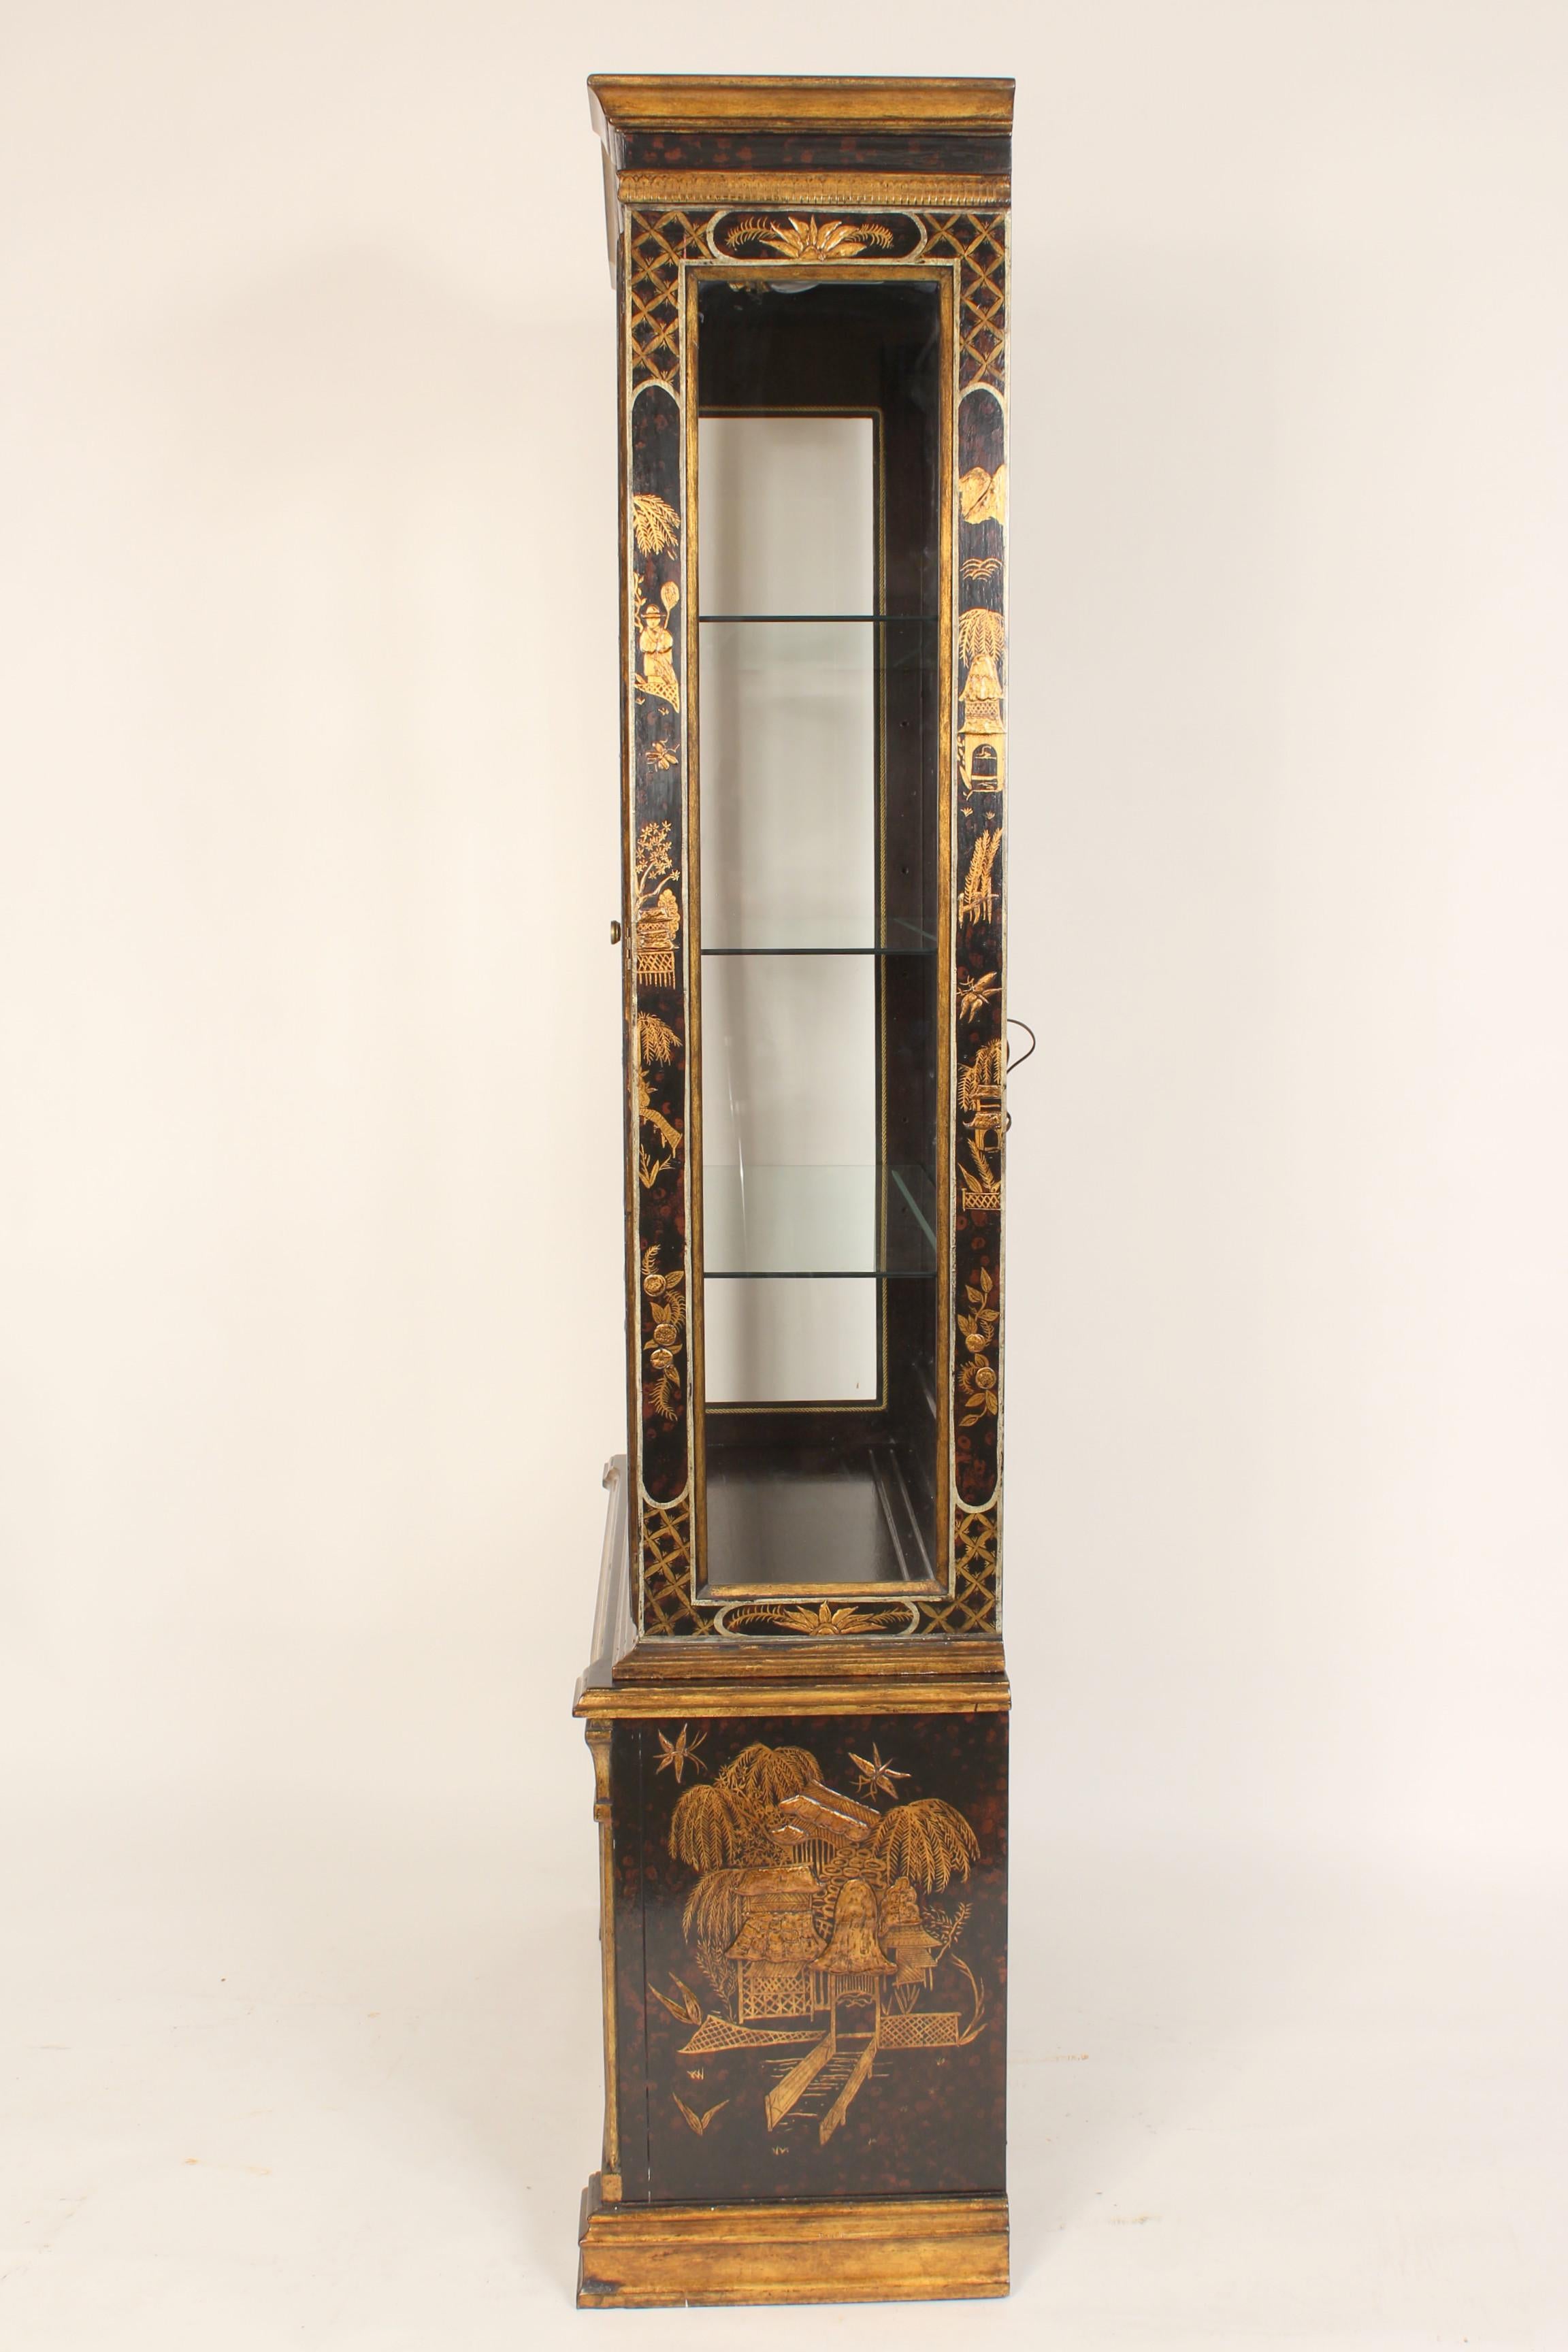 North American Pair of George III Style Chinoiserie Decorated Display Cabinets